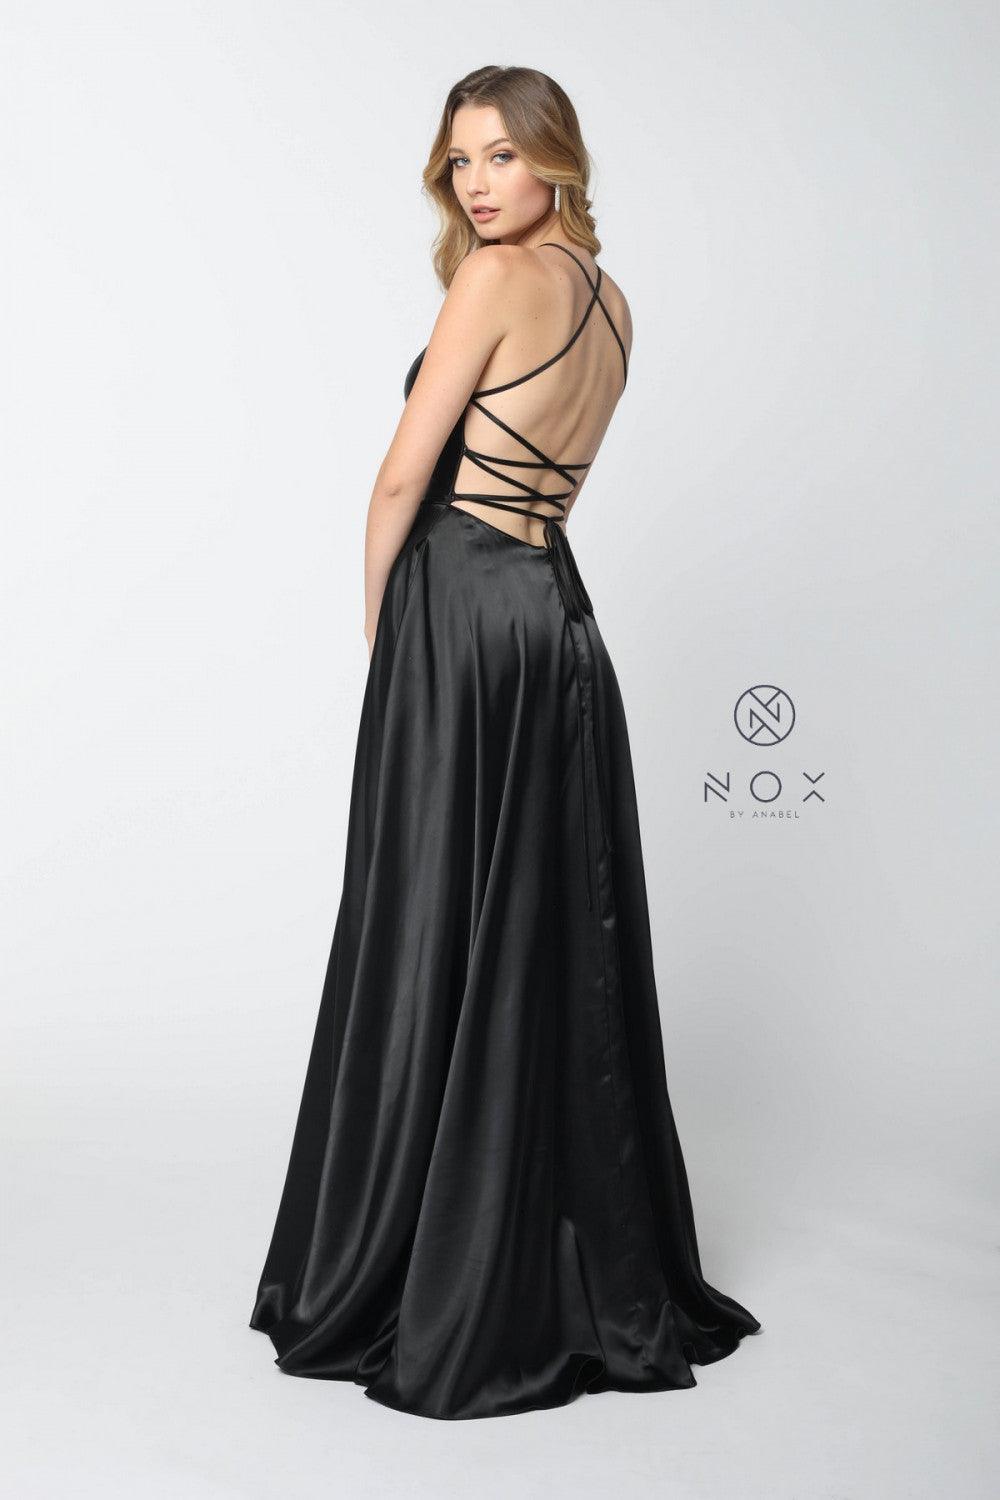 Long Prom Dress Evening Gown Prom Dress - The Dress Outlet Nox Anabel